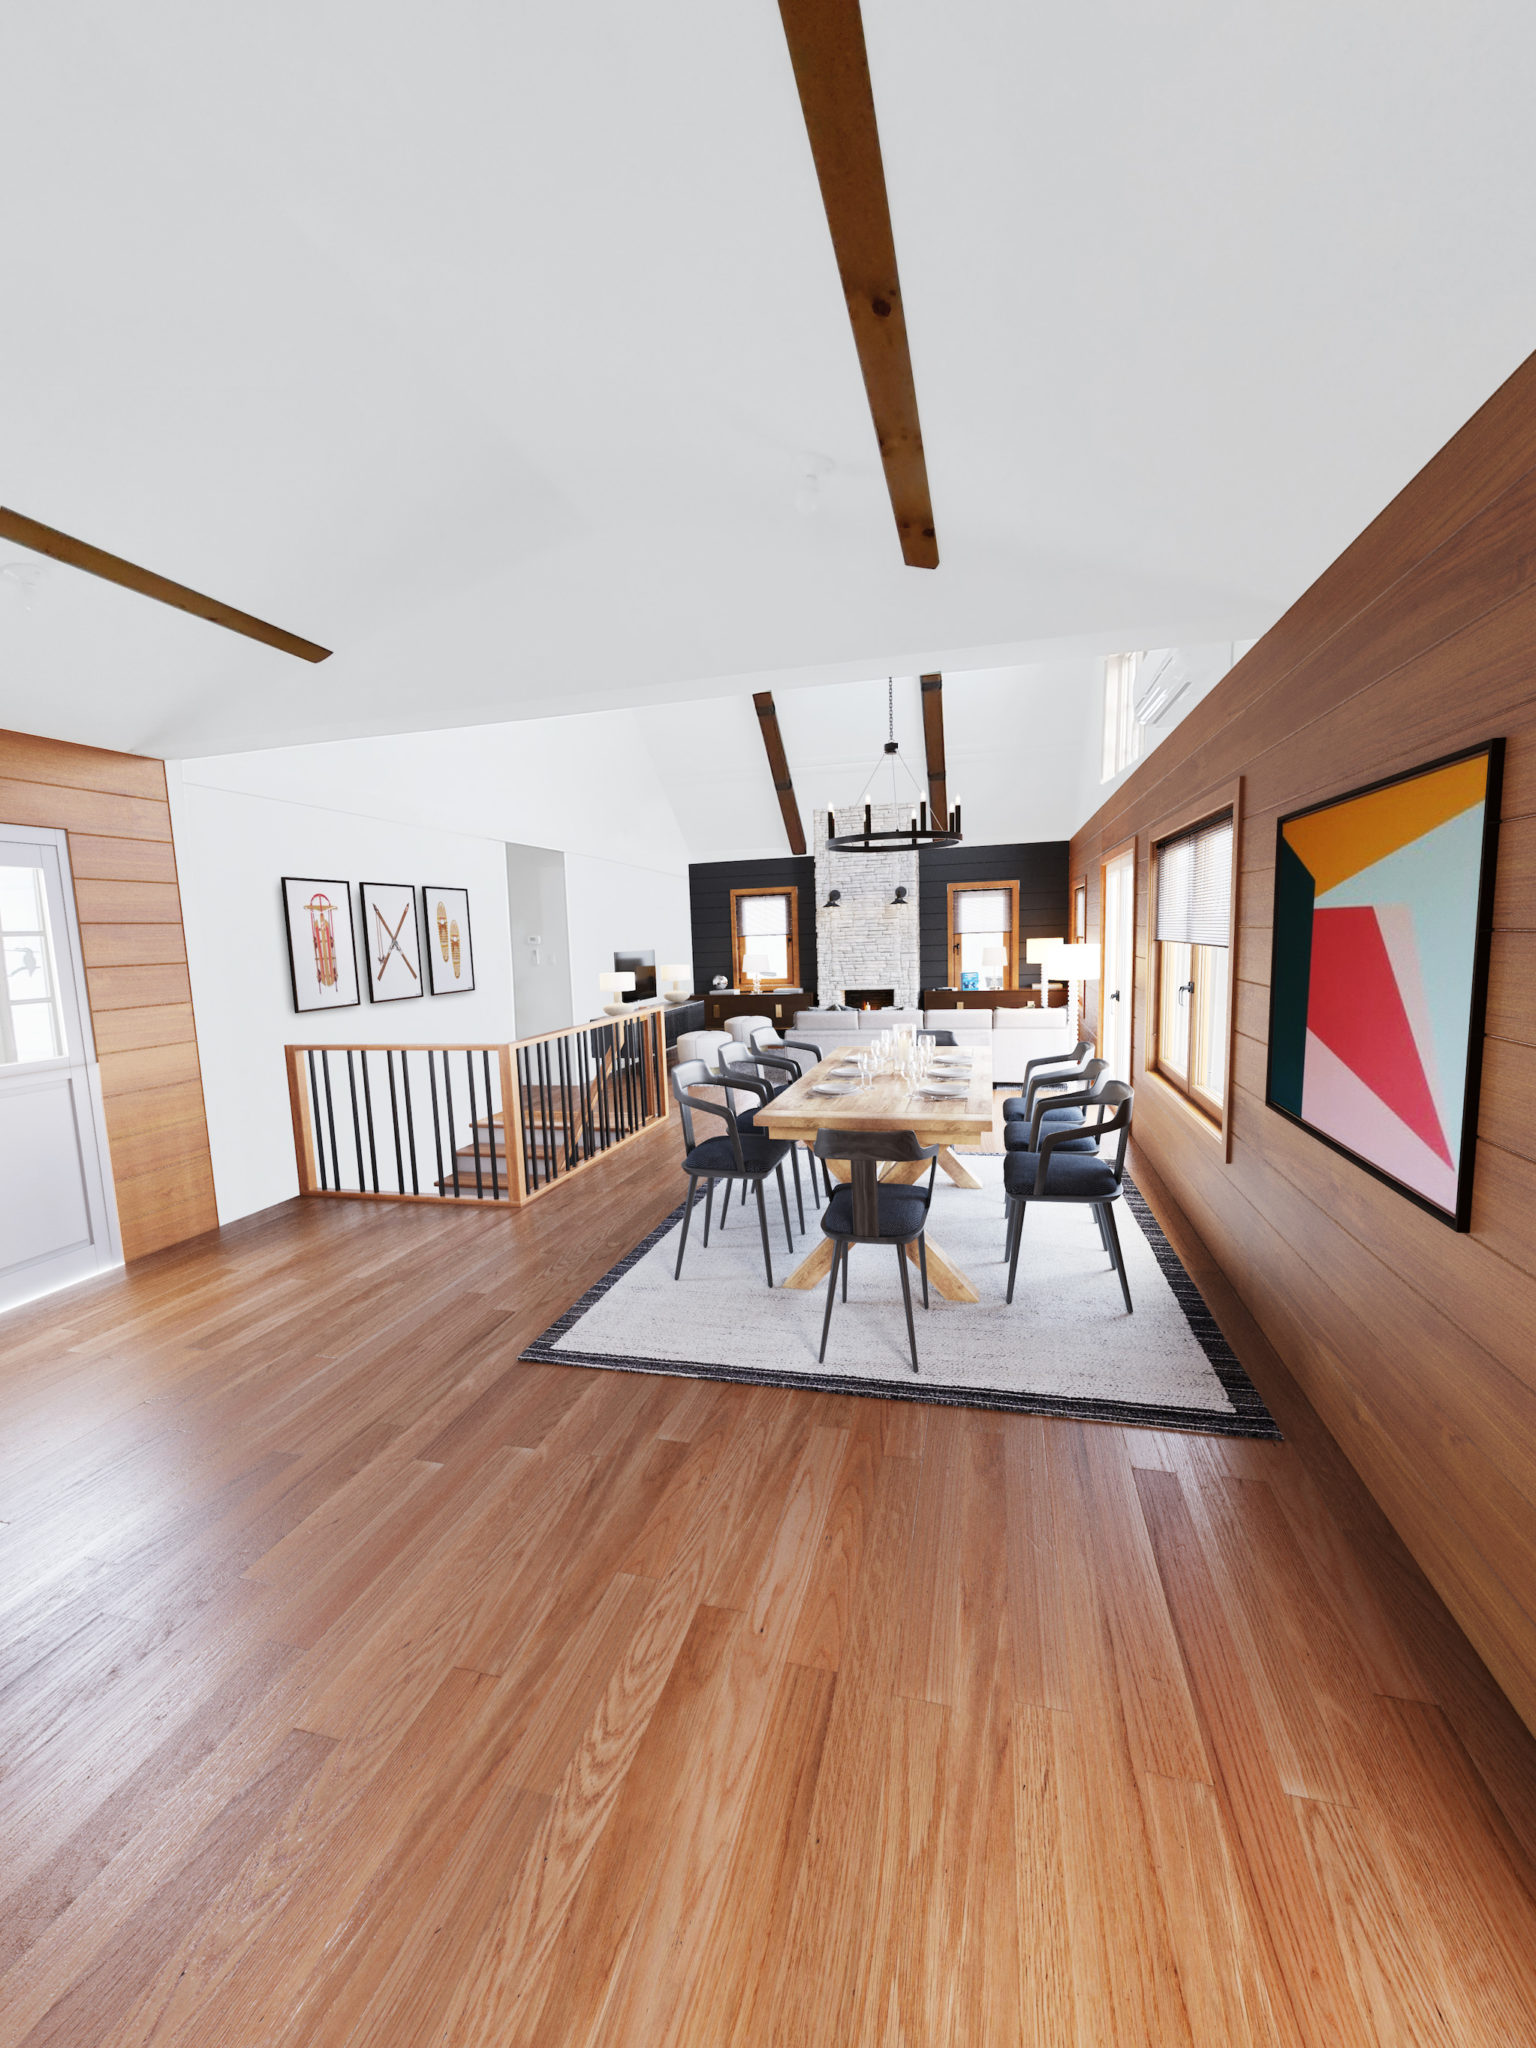 A living room with wooden-colored walls and flooring with a geometric art hanging on the wall and a dining set